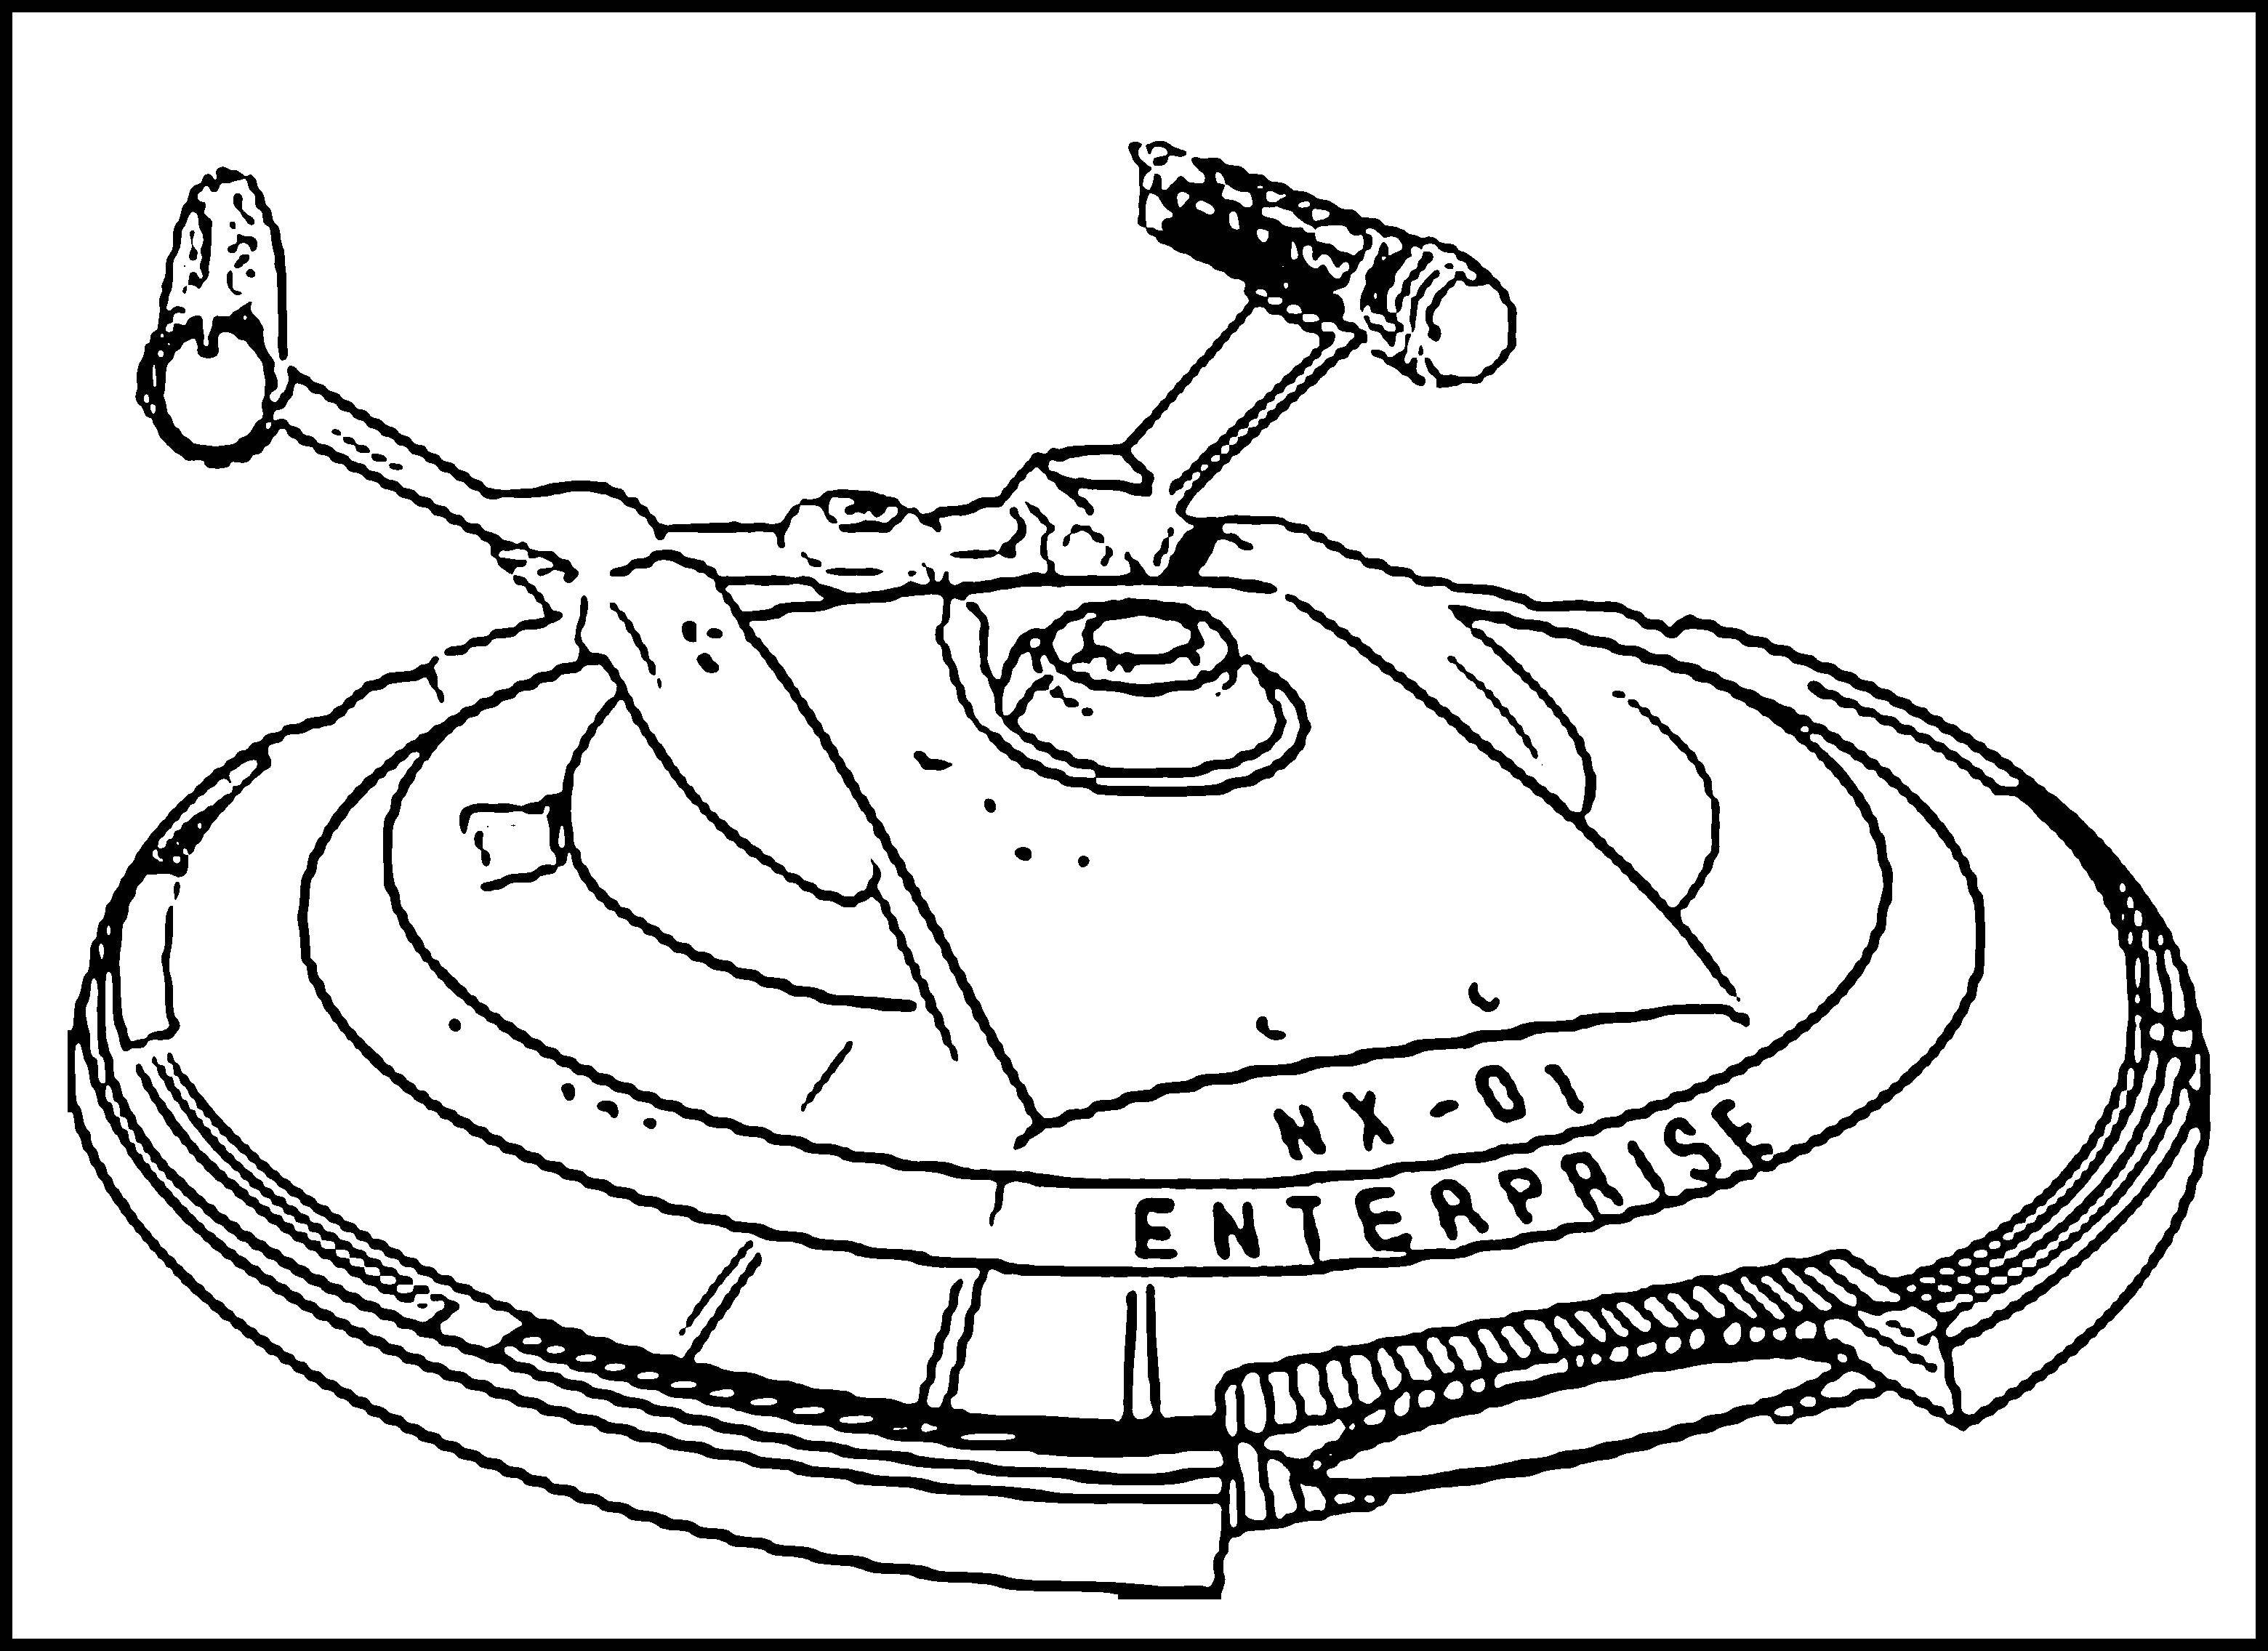 Coloring The starship enterprise . Category Flying saucers. Tags:  the starship, enterprise.